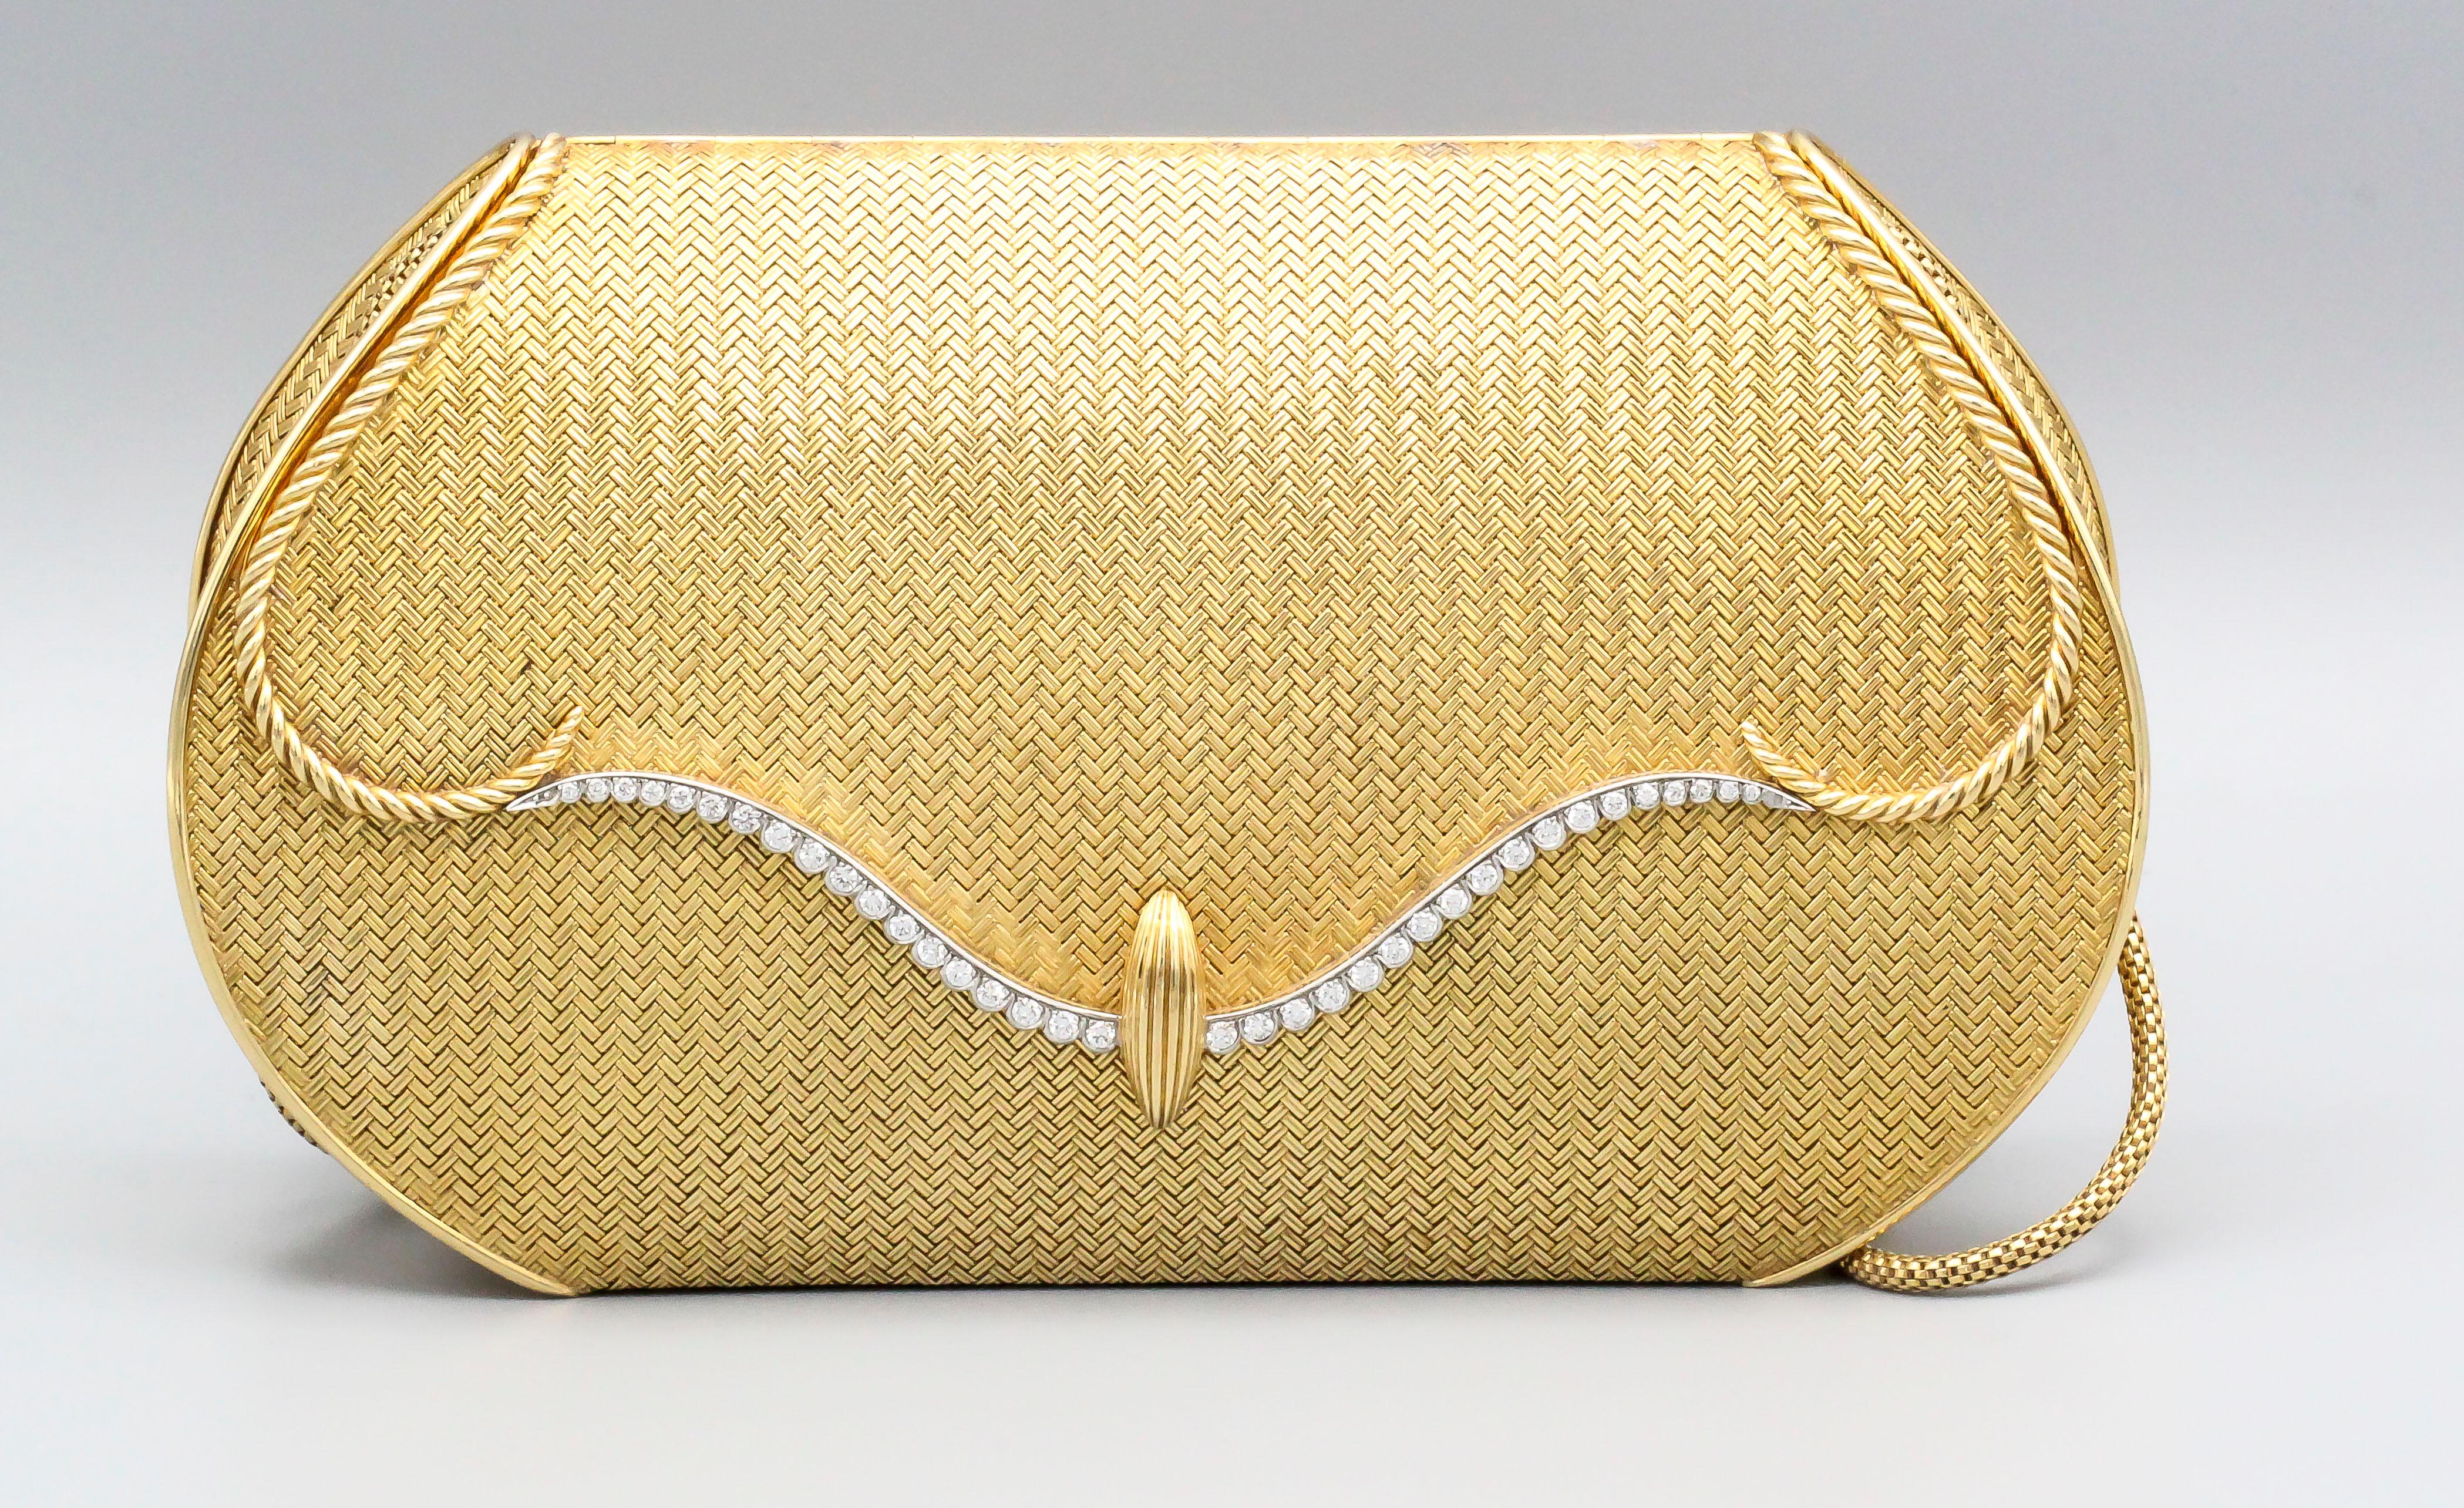 Very fine diamond and 18K gold mesh purse by Piaget, circa 1970s. It features an 18K gold short shoulder strap. Once opened, the purse reveals a large mirror and enough space to fit a modern day smart phone and several accessories.  The chain is